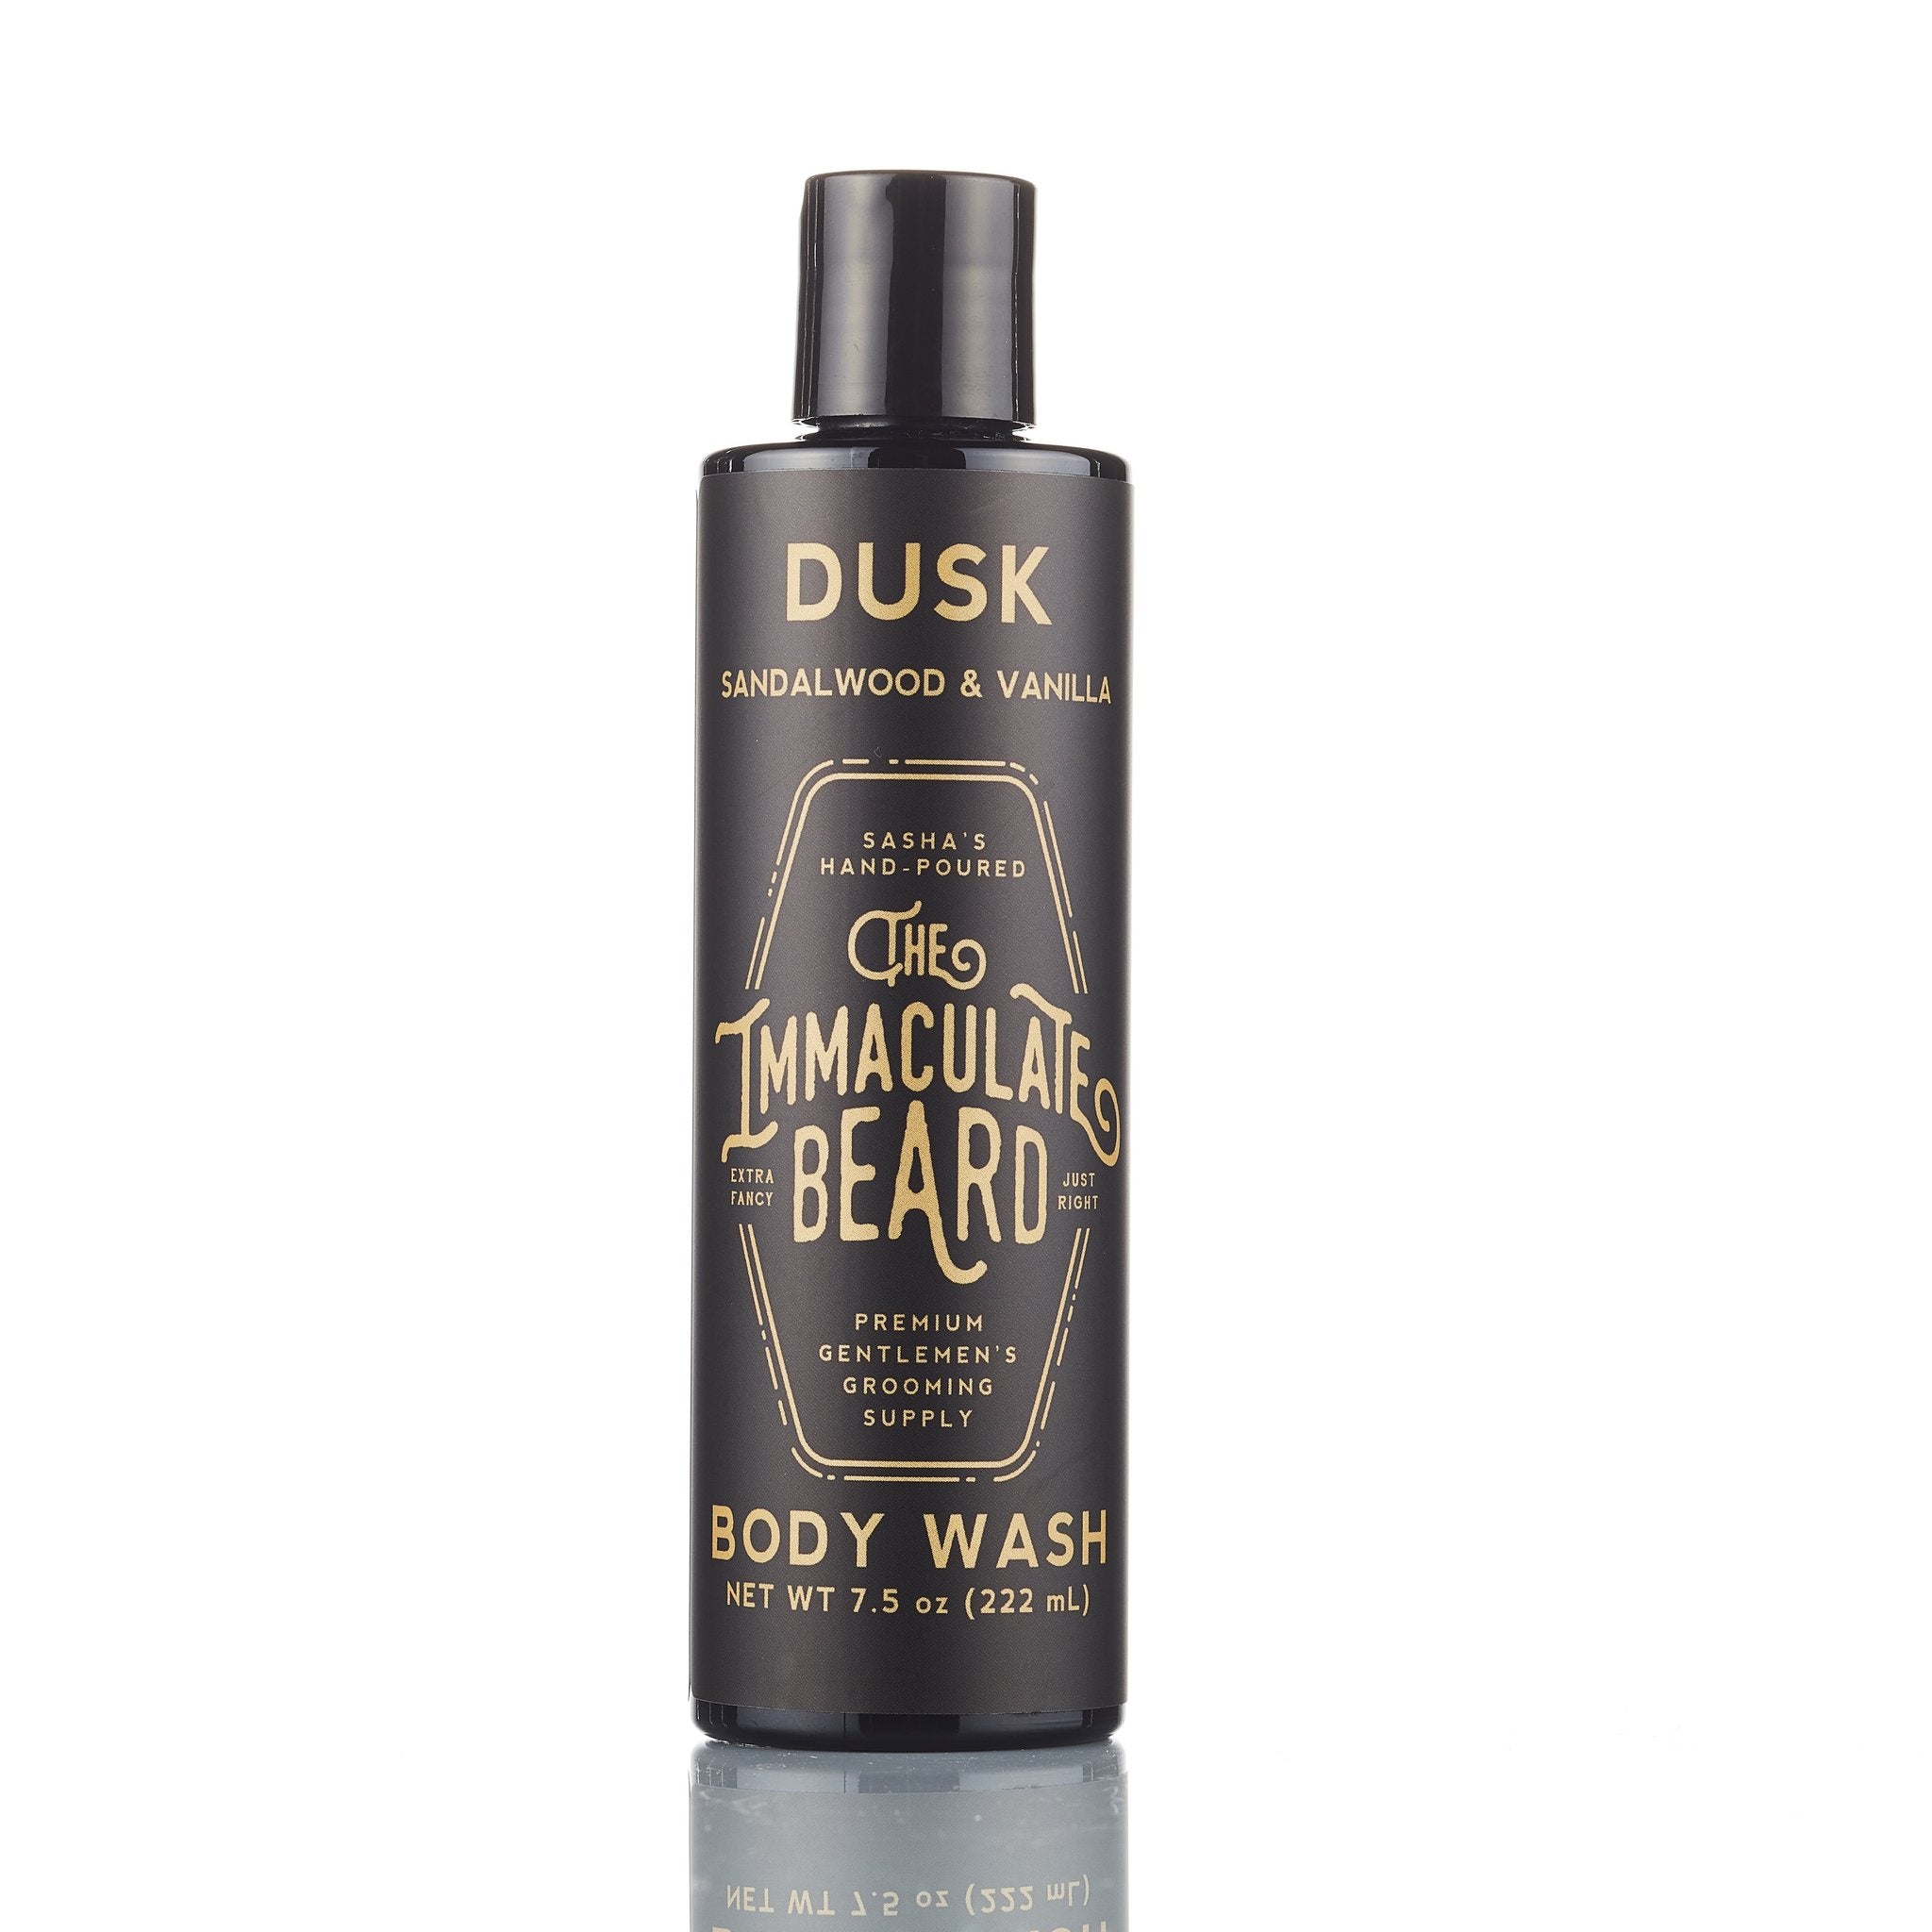 Immaculate Body Wash